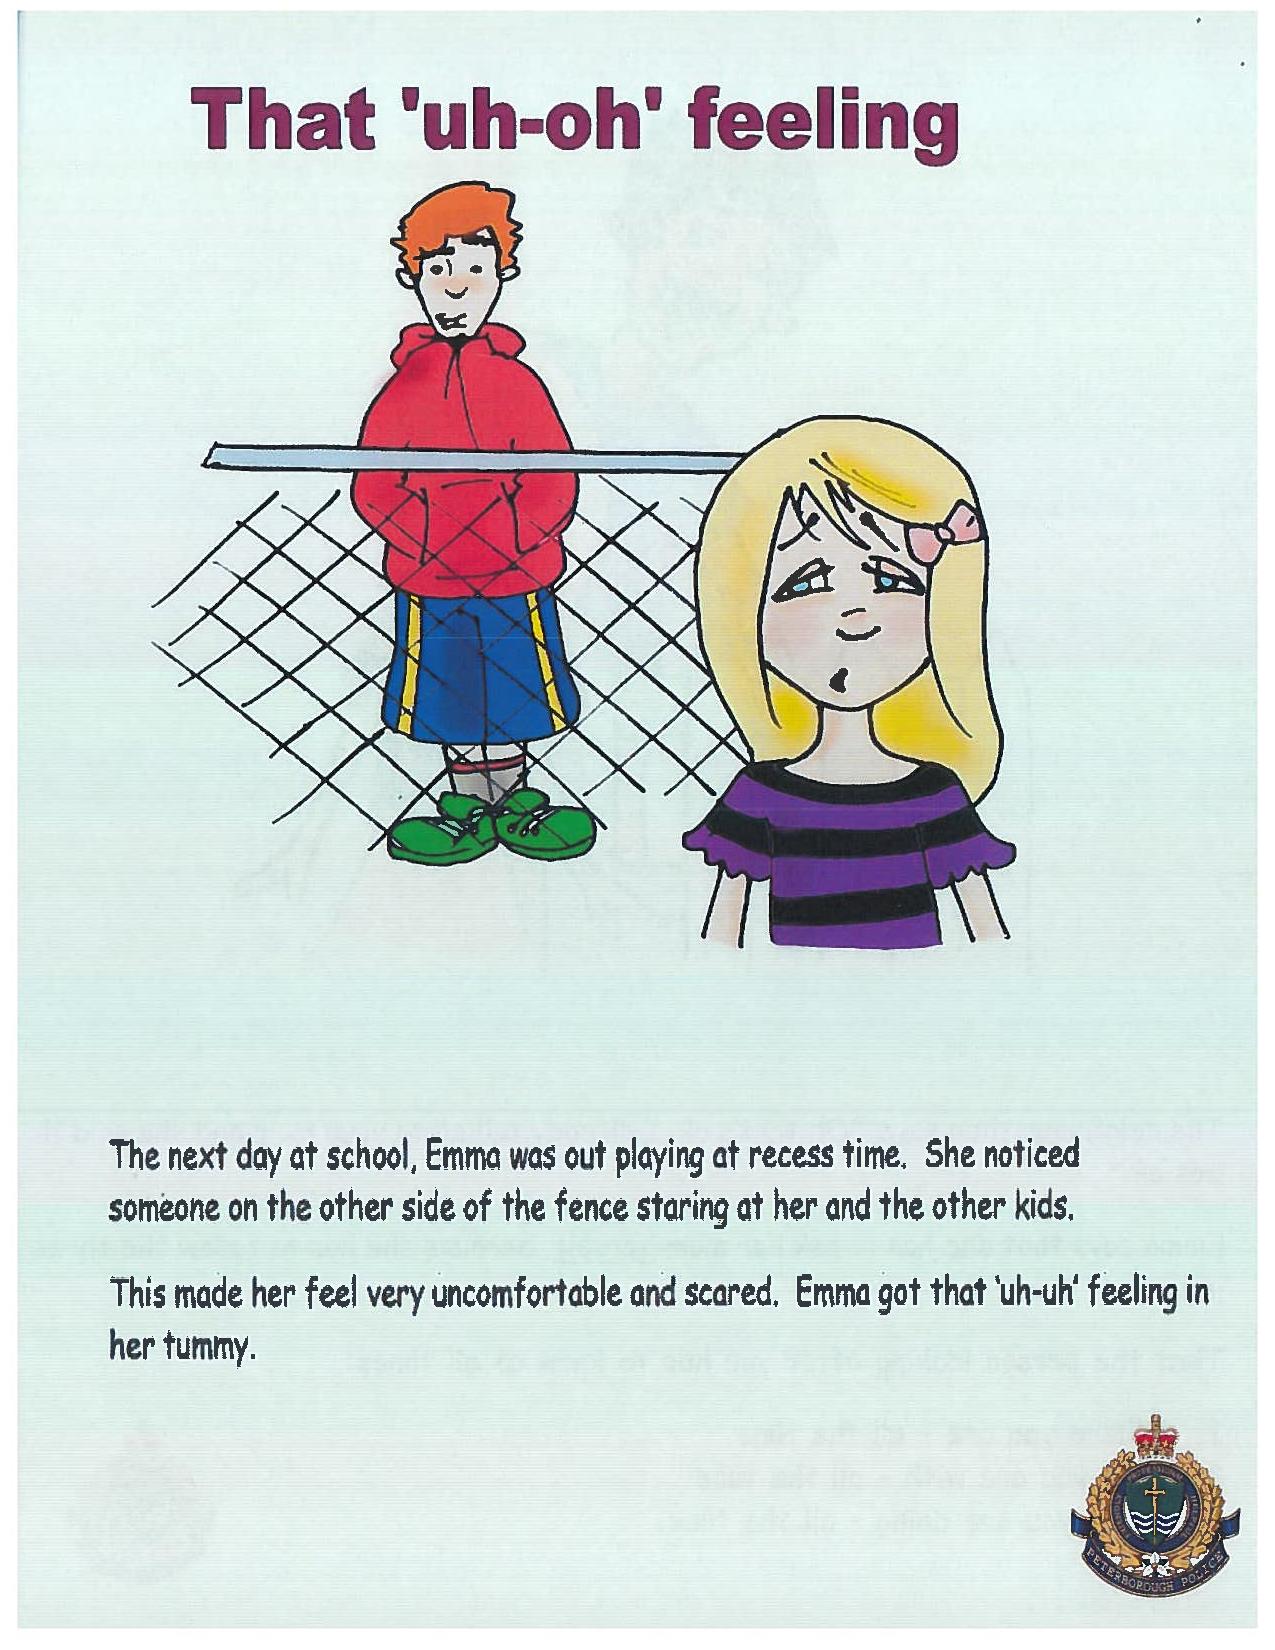 A cartoon image shows a man standing on the opposite side of a fence while a girl looks at him uneasily. Text in the image says"The next day at school, Emma was out playing at recess time. She noticed someone on the other side of the fence staring at her and the other kids. This made her feel very uncomfortable and scared. Emma got the 'uh-uh' feeling in her tummy."